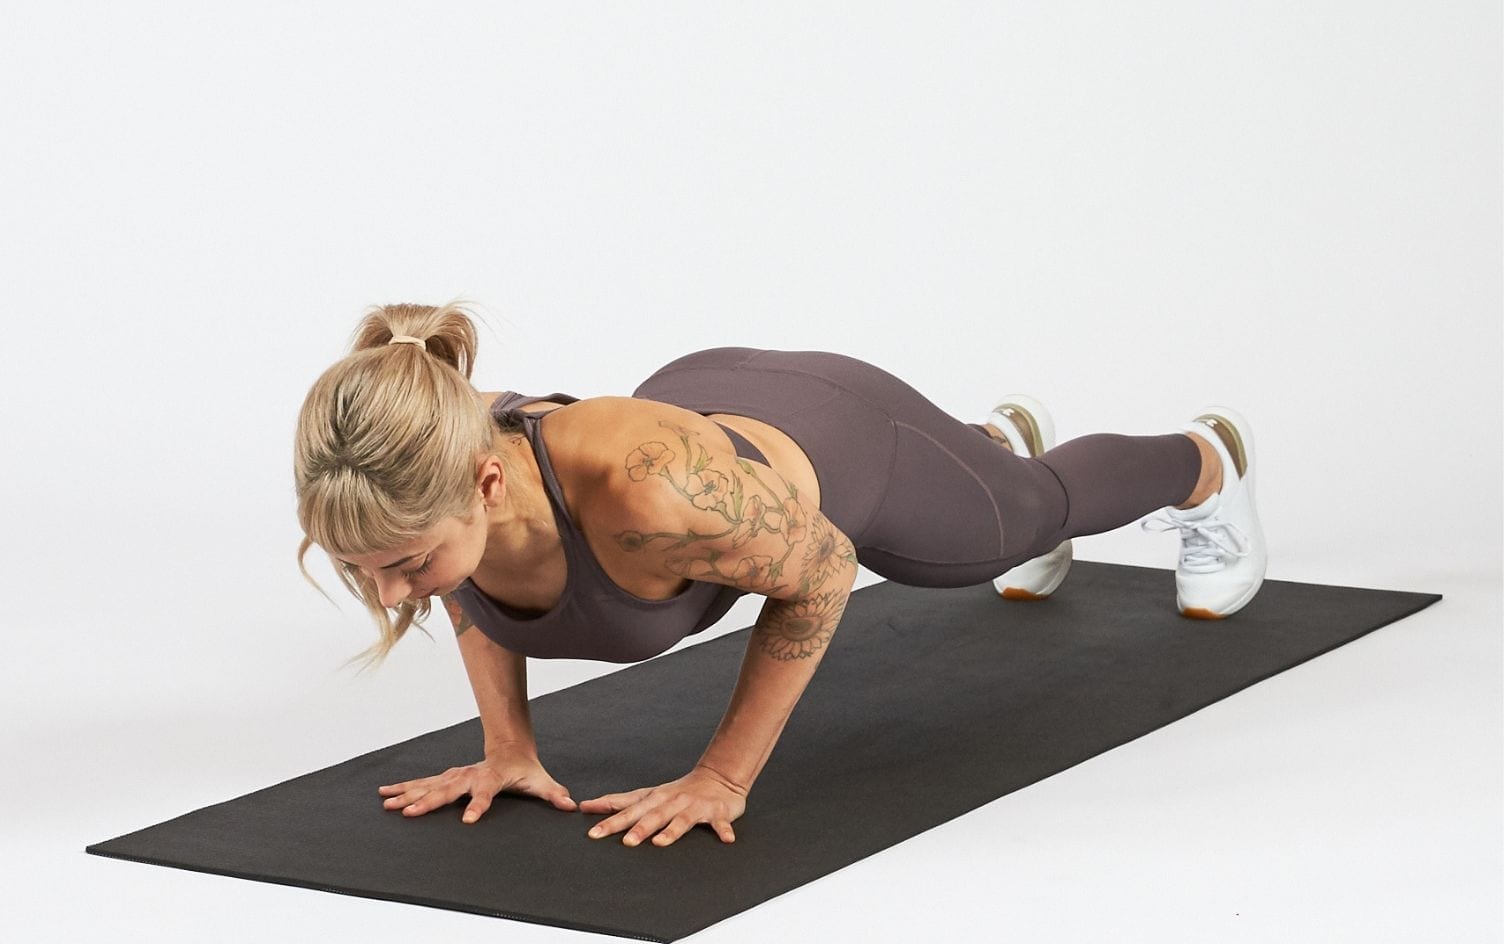 10 Pushup Variations From Beginner to Advanced, Fitness